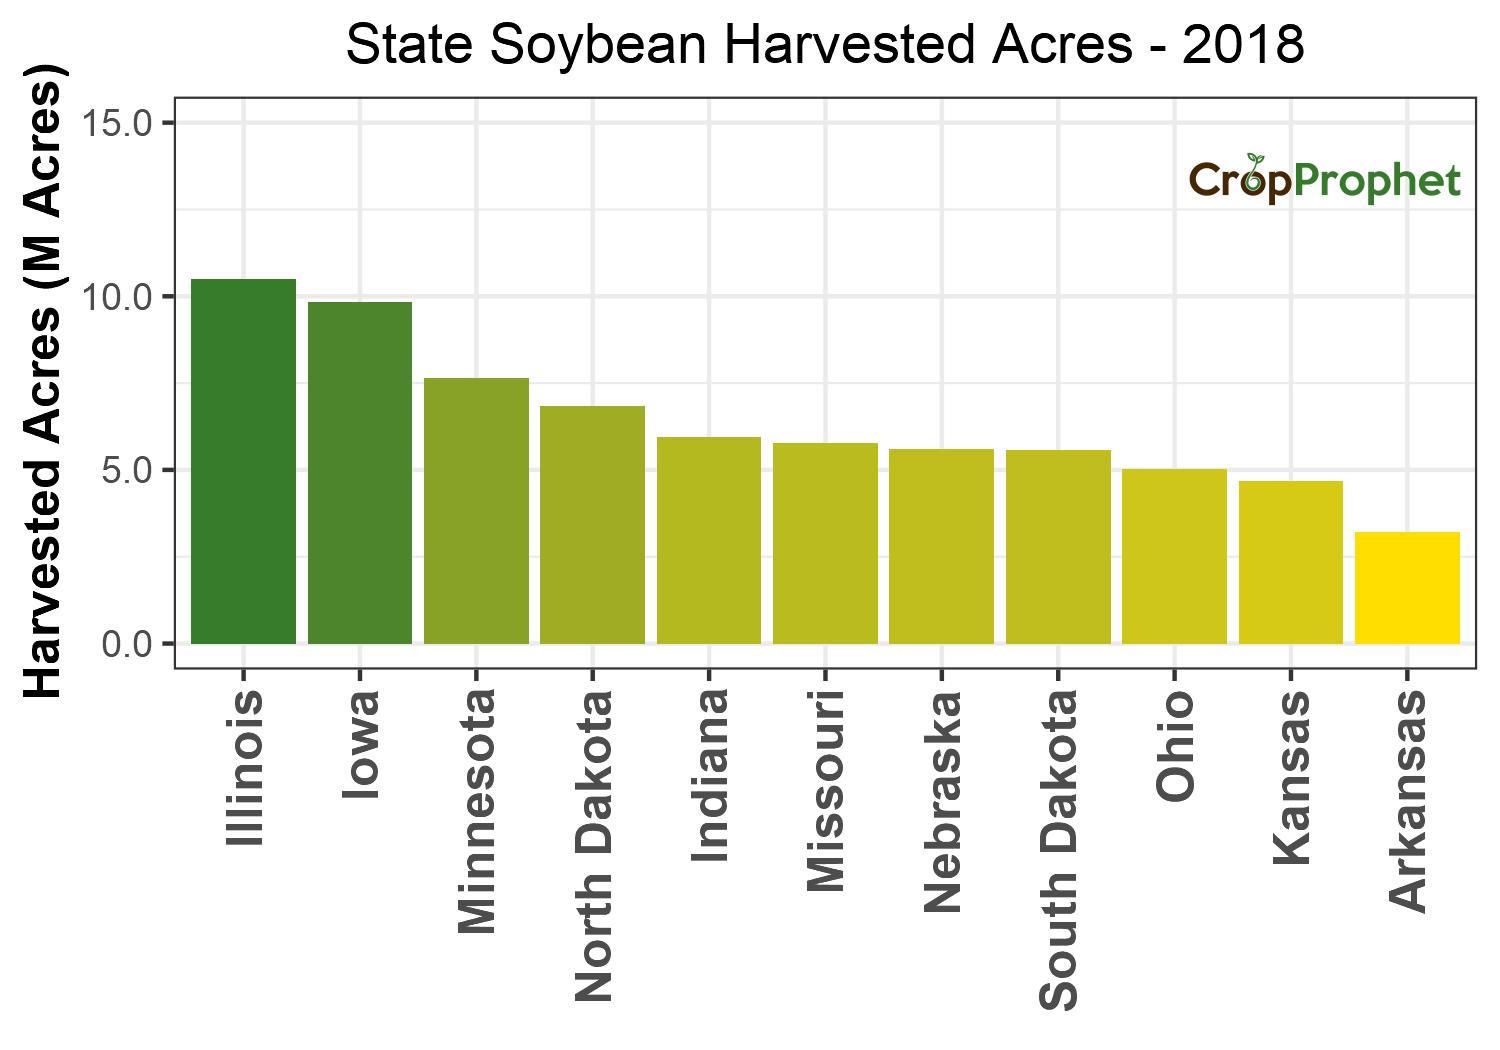 Soybean Harvested Acres by State - 2018 Rankings